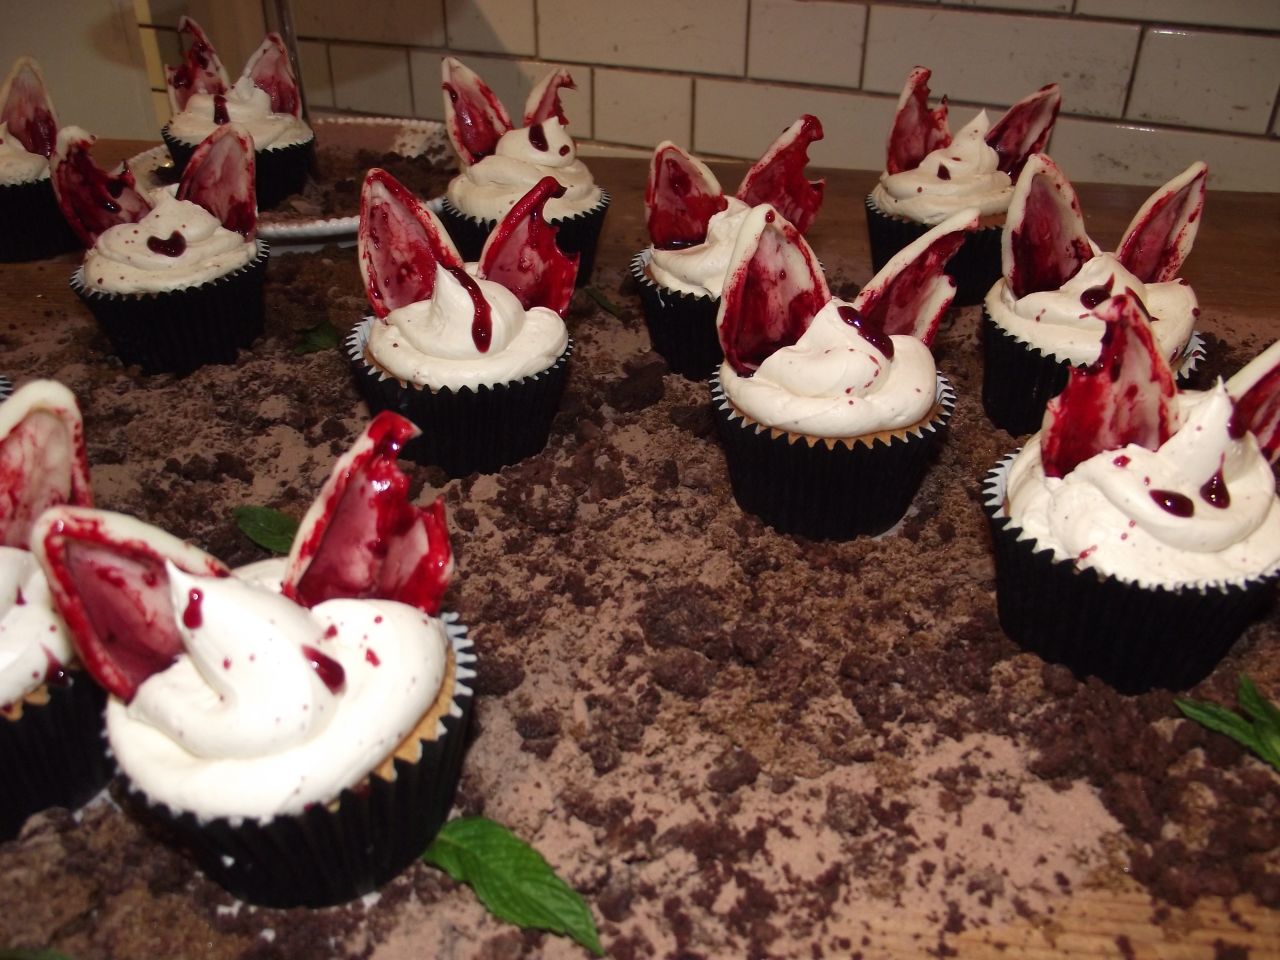 Also from the <a href="https://www.facebook.com/TheDaintyBakehouse" target="_blank" target="_blank">Dainty Bakehouse</a>, severed cherry rabbit ears anybody?